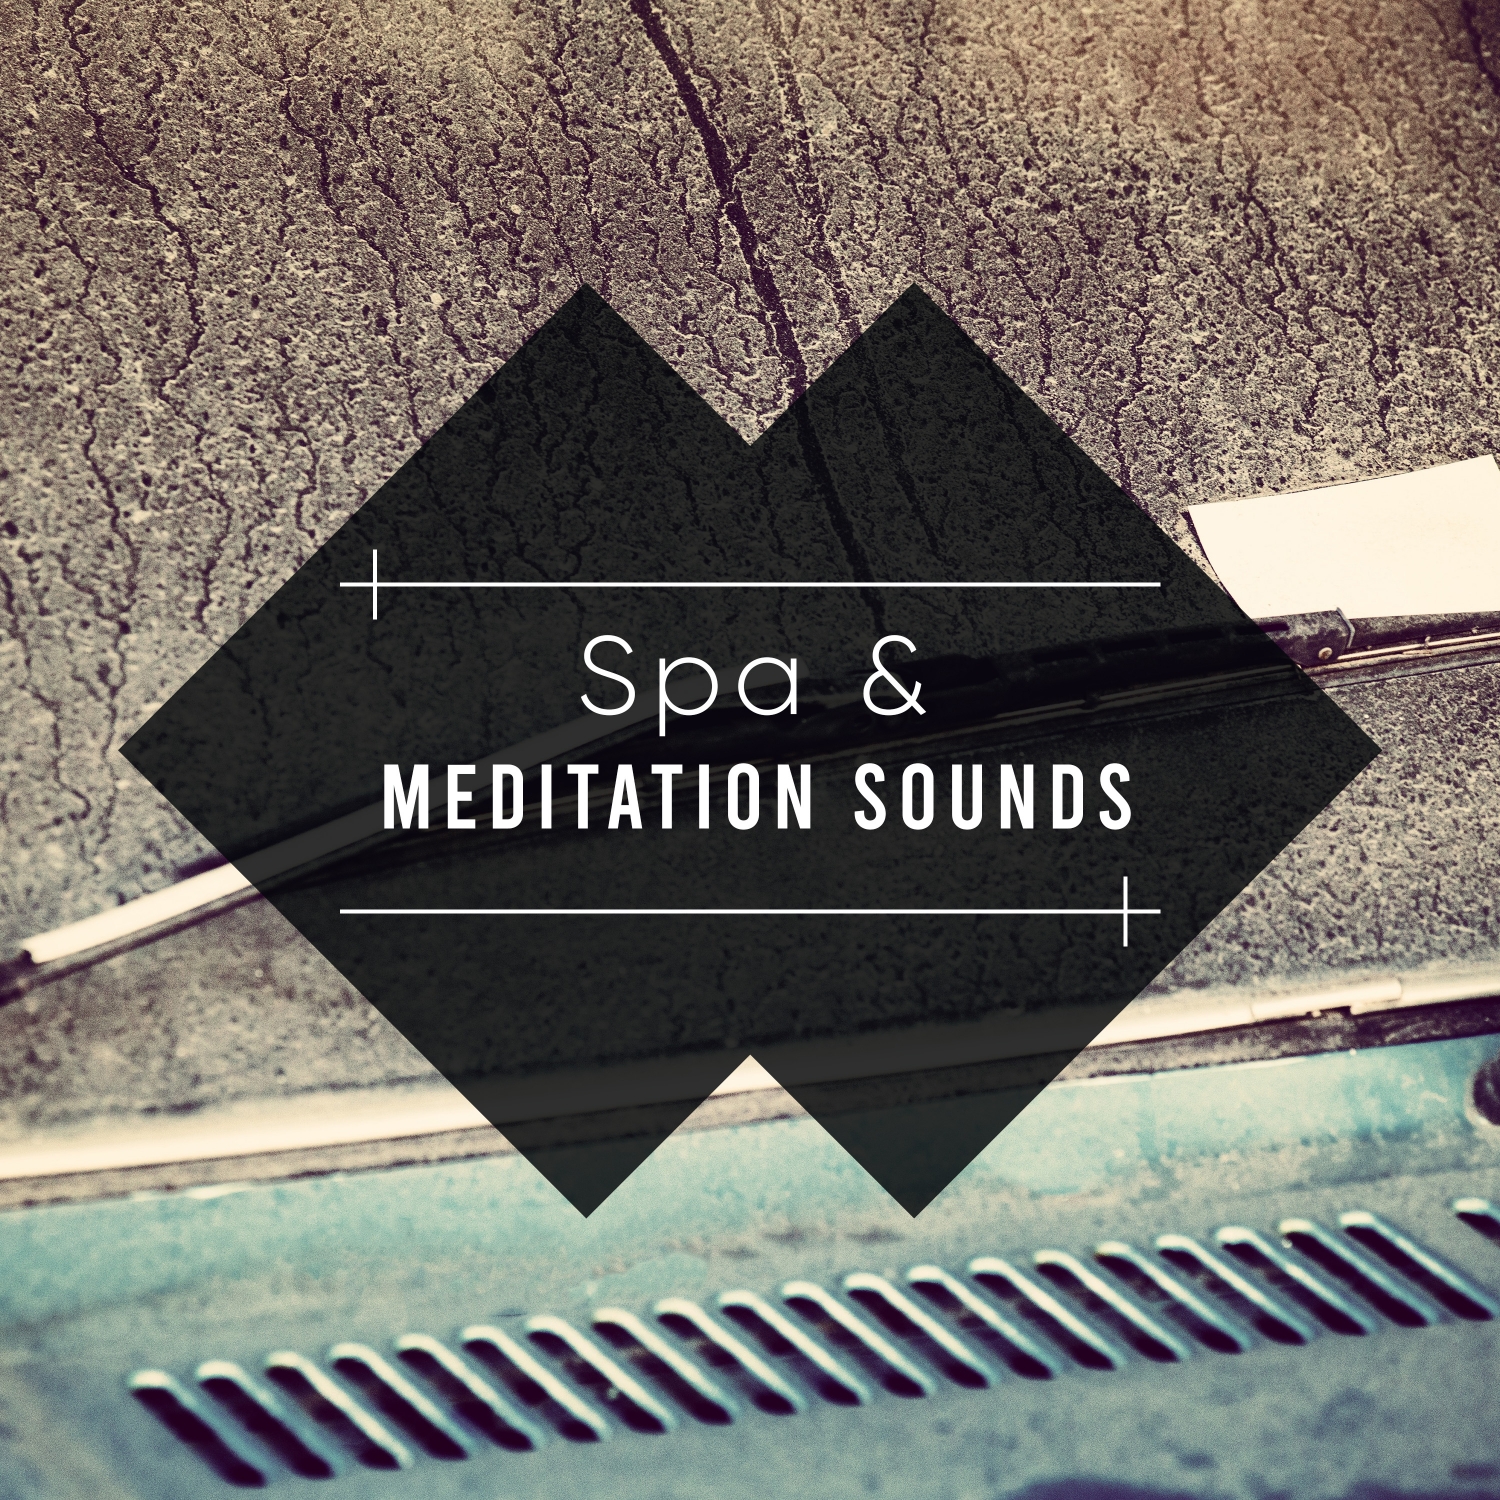 20 Spa and Meditation Sounds: Find Calm, Reduce Anxiety and Relieve Stress